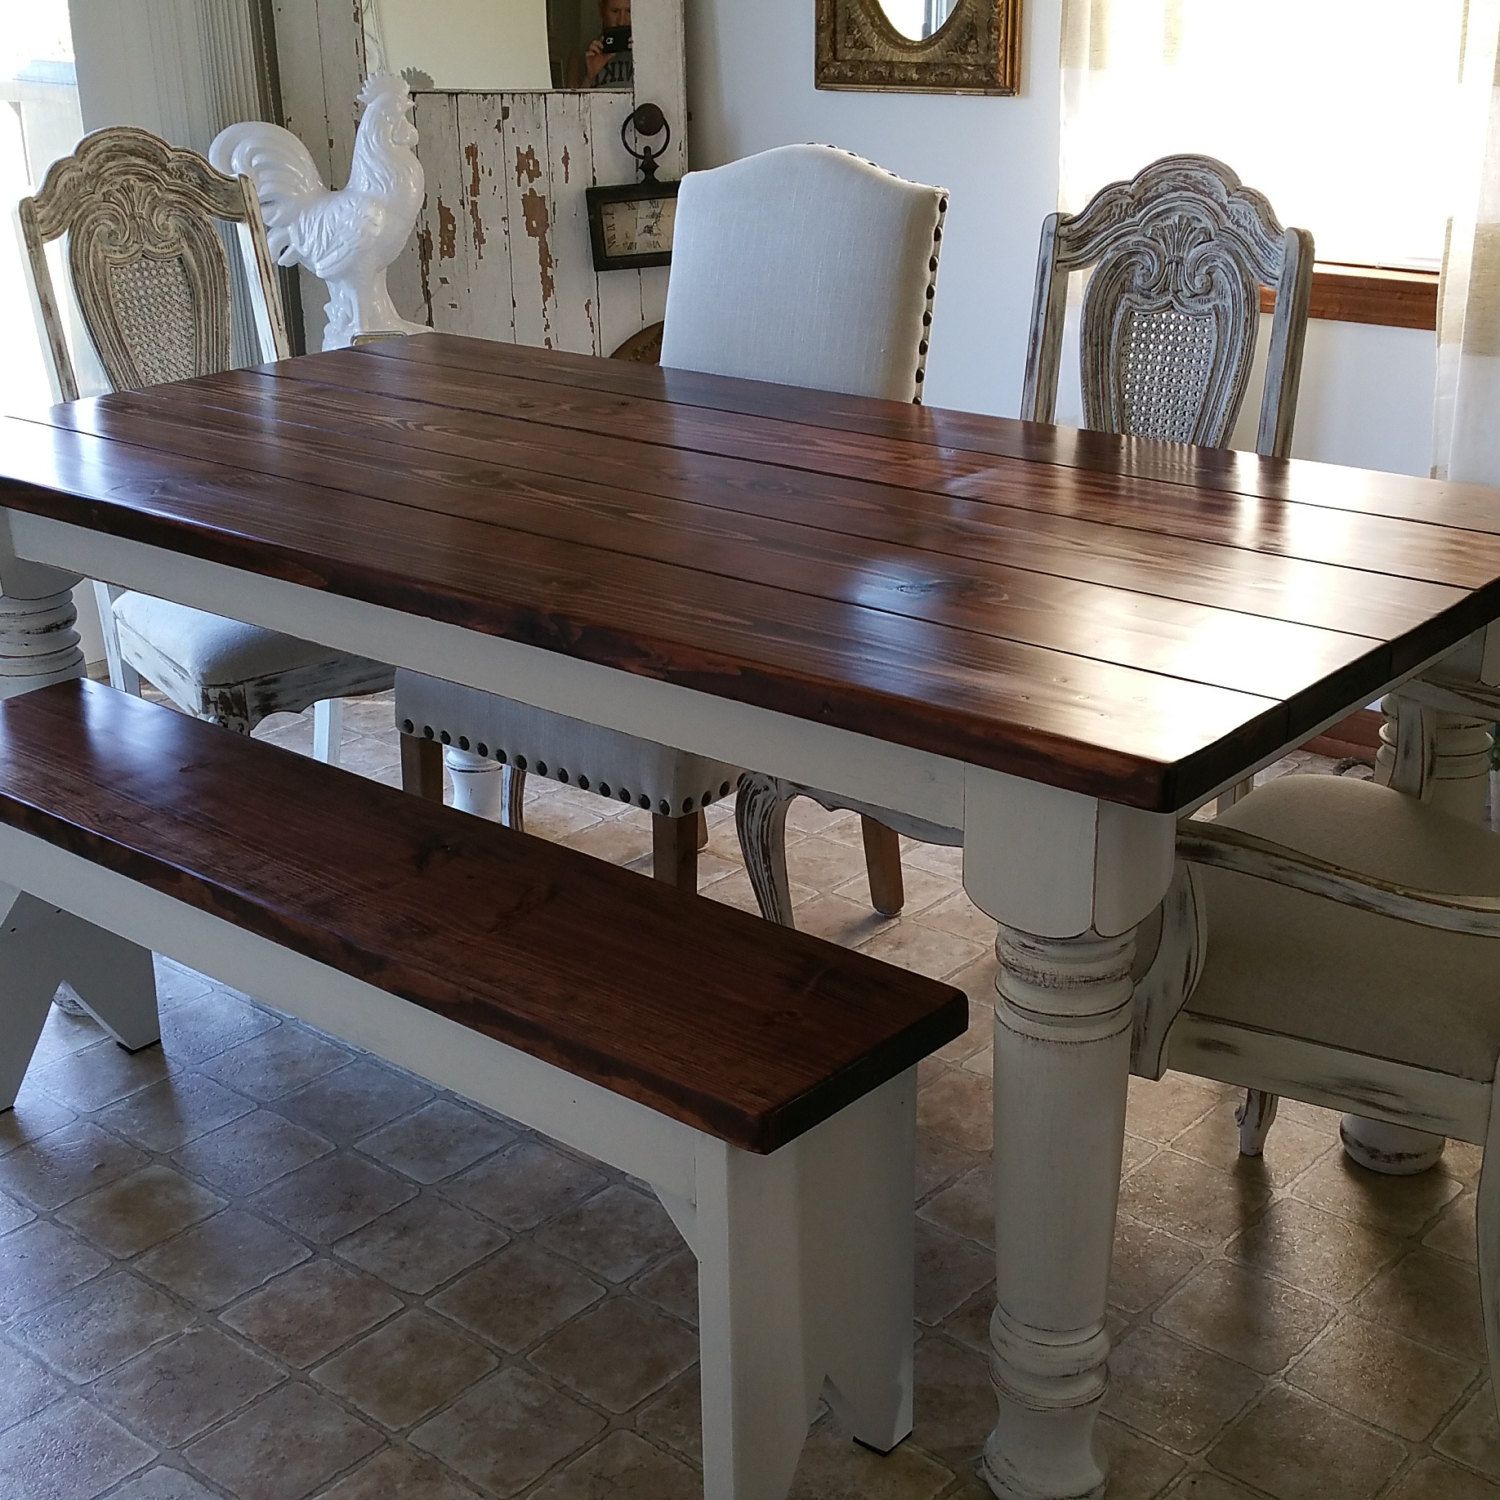 Farmhouse Dining Table with Bench -   Farmhouse table with bench Ideas